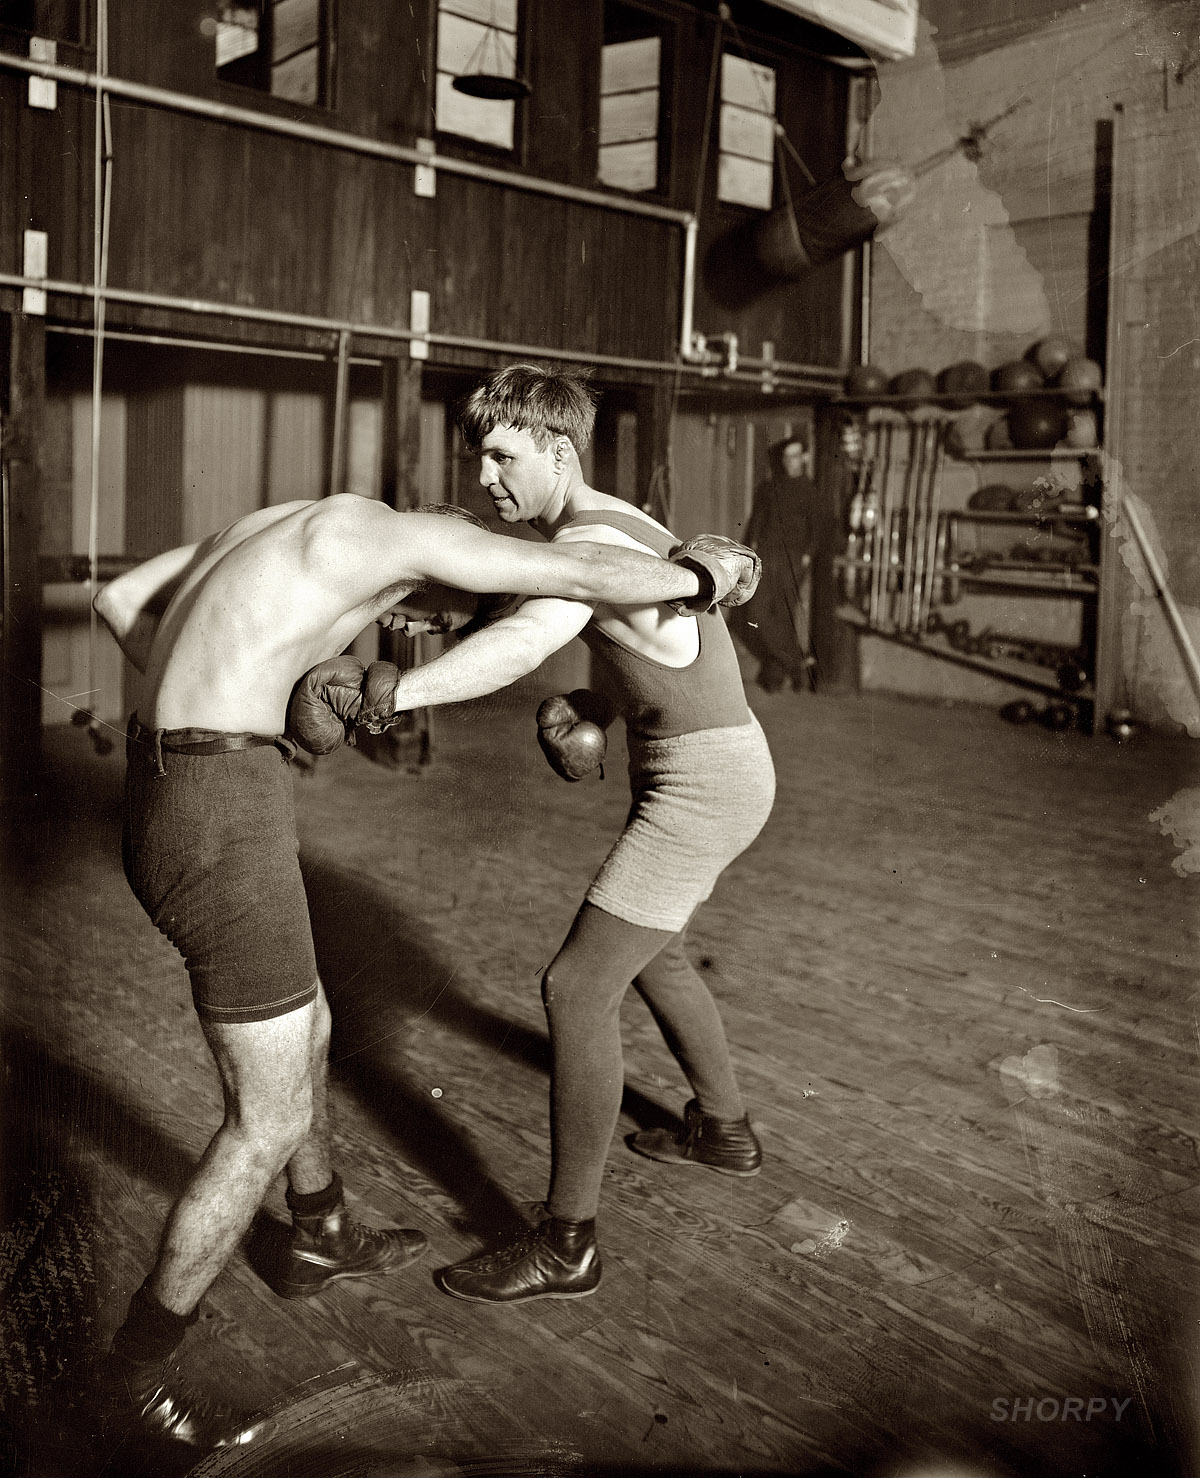 Lightweight boxing champ "Bat" Nelson in 1911. After retiring from the ring, Bat (short for Battling; aka the Durable Dane, born Oscar Nielsen) dabbled in fight promotion and vaudeville. In January 1954, "a pathetic little man of 80 pounds, his mind a complete blank," Bat was committed to the Chicago State Hospital; a month later he was dead of lung cancer at age 71. With 68 wins, 19 draws and 19 losses, Bat once said that although he had "lost several fights," he had never been beaten. 8x10 glass negative, George Grantham Bain Collection. View full size.